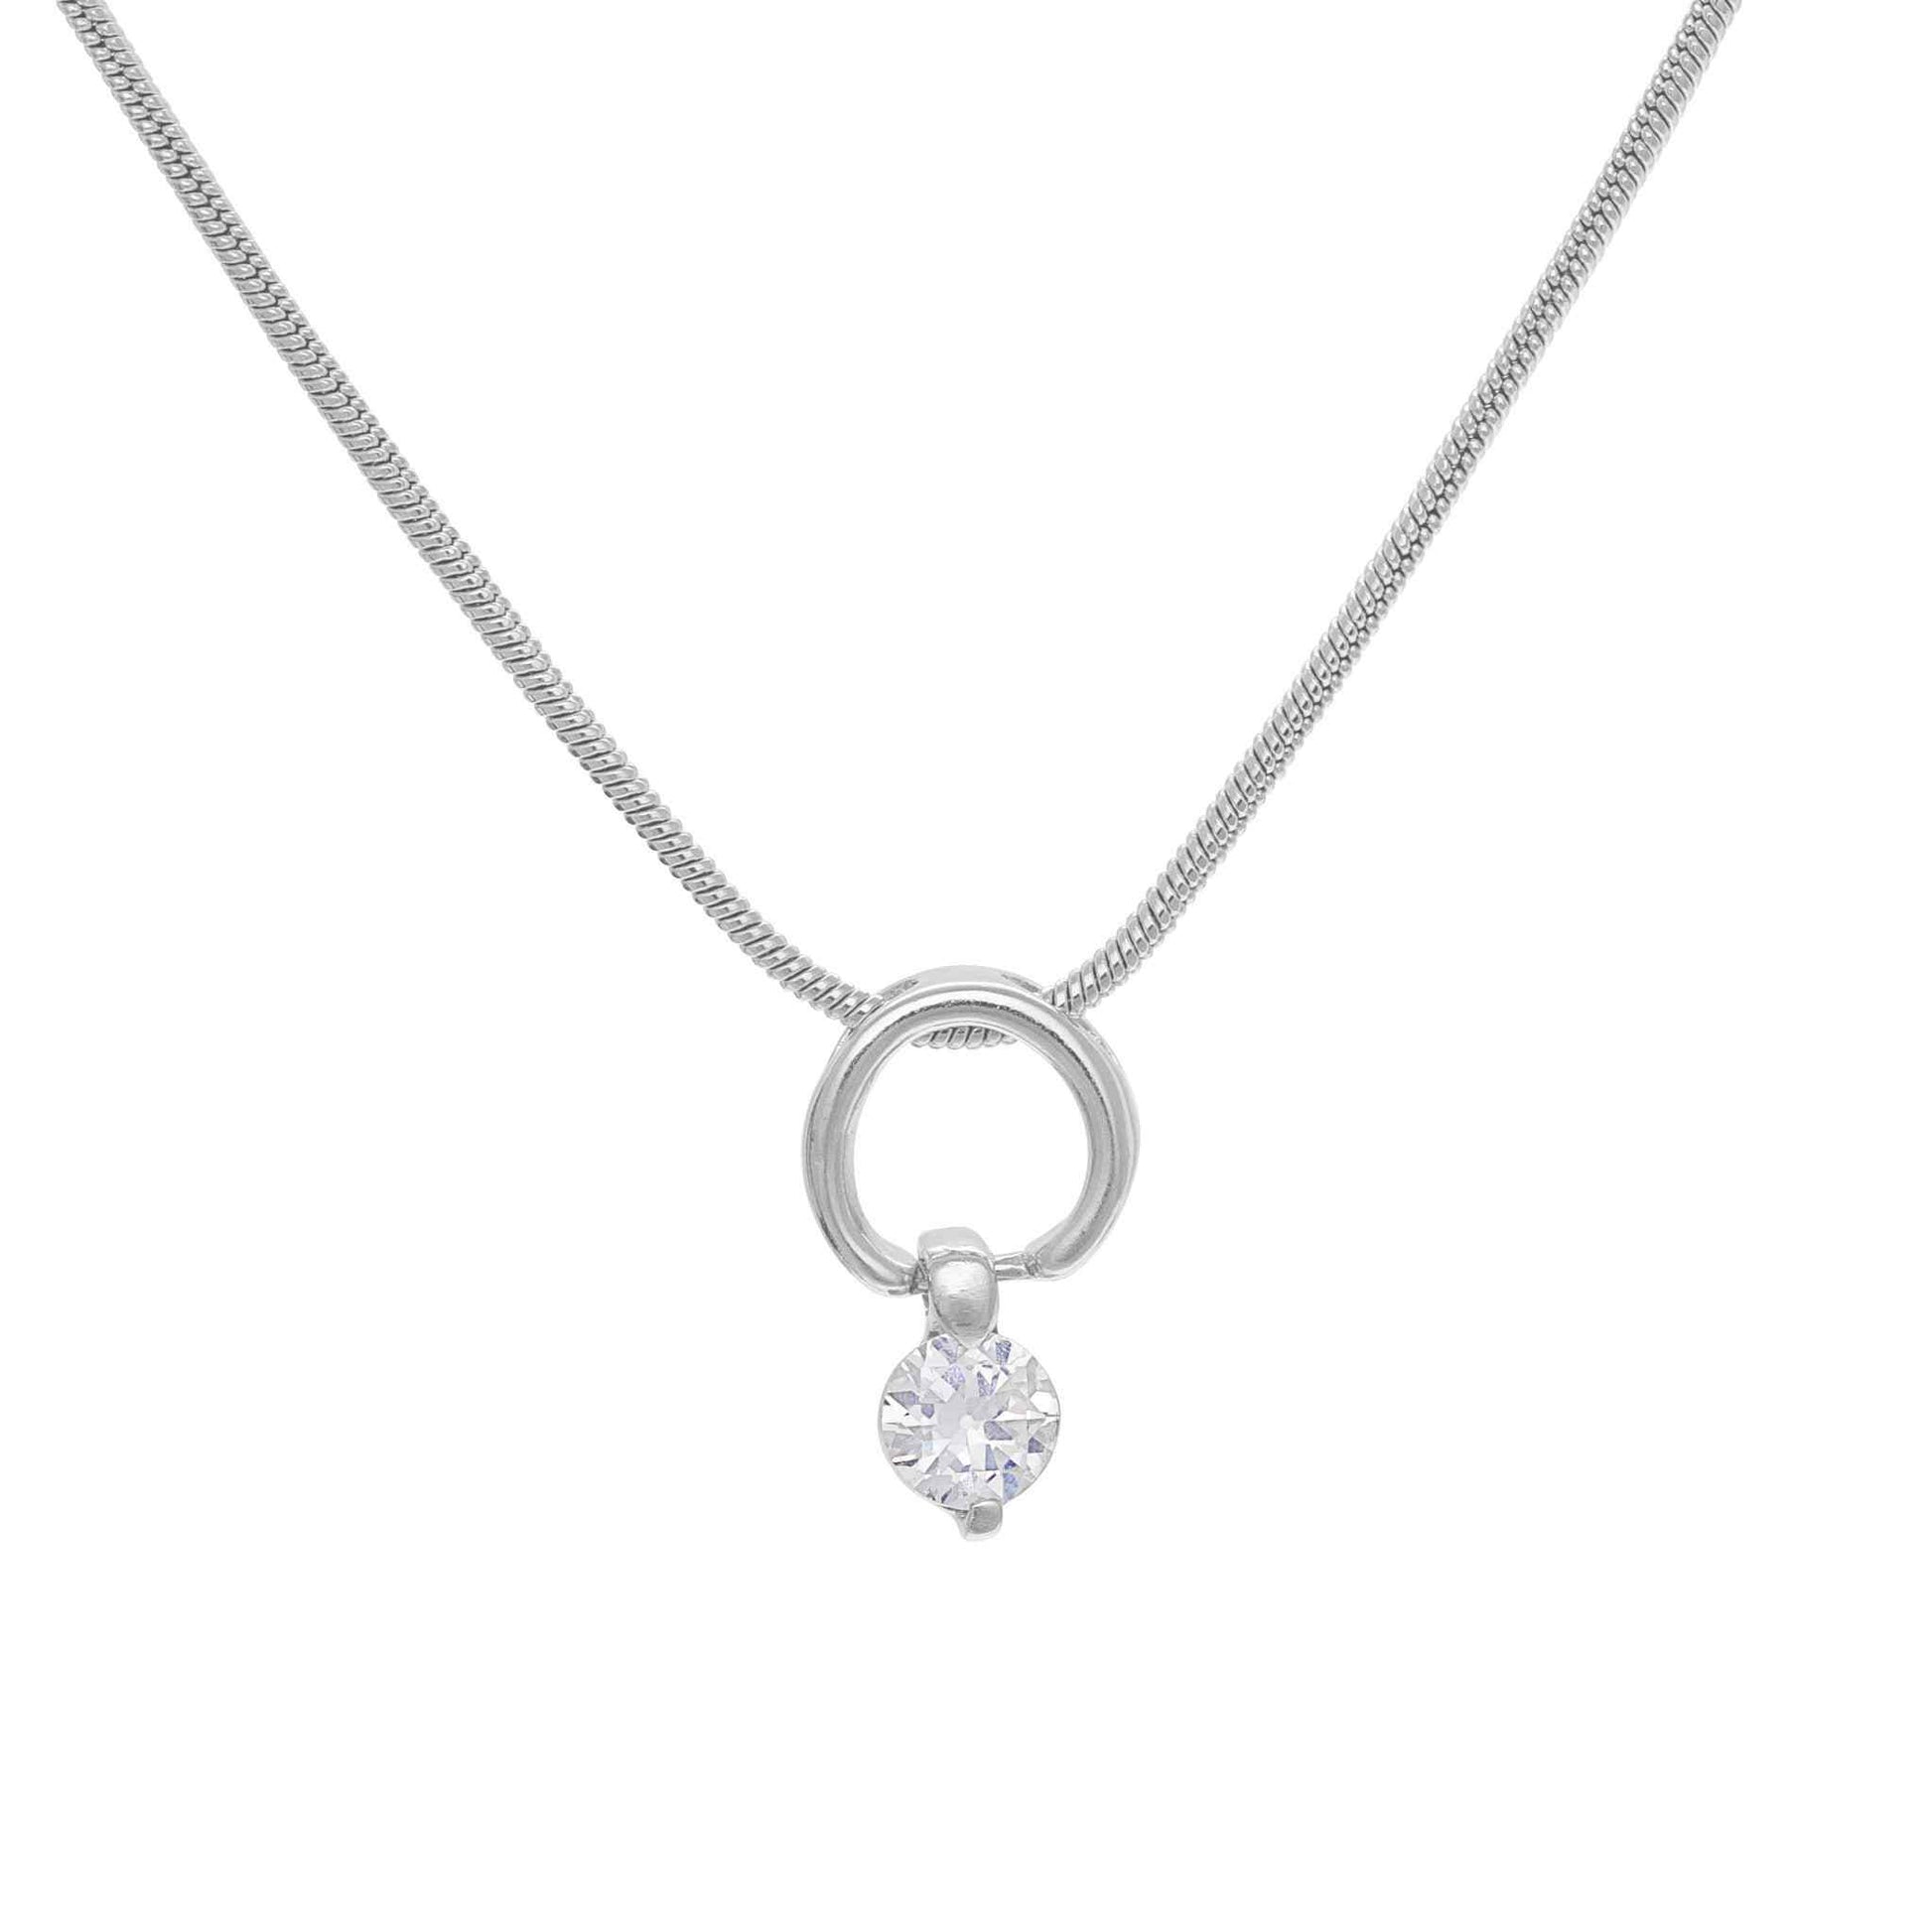 A round necklace with hanging round simulated diamond displayed on a neutral white background.